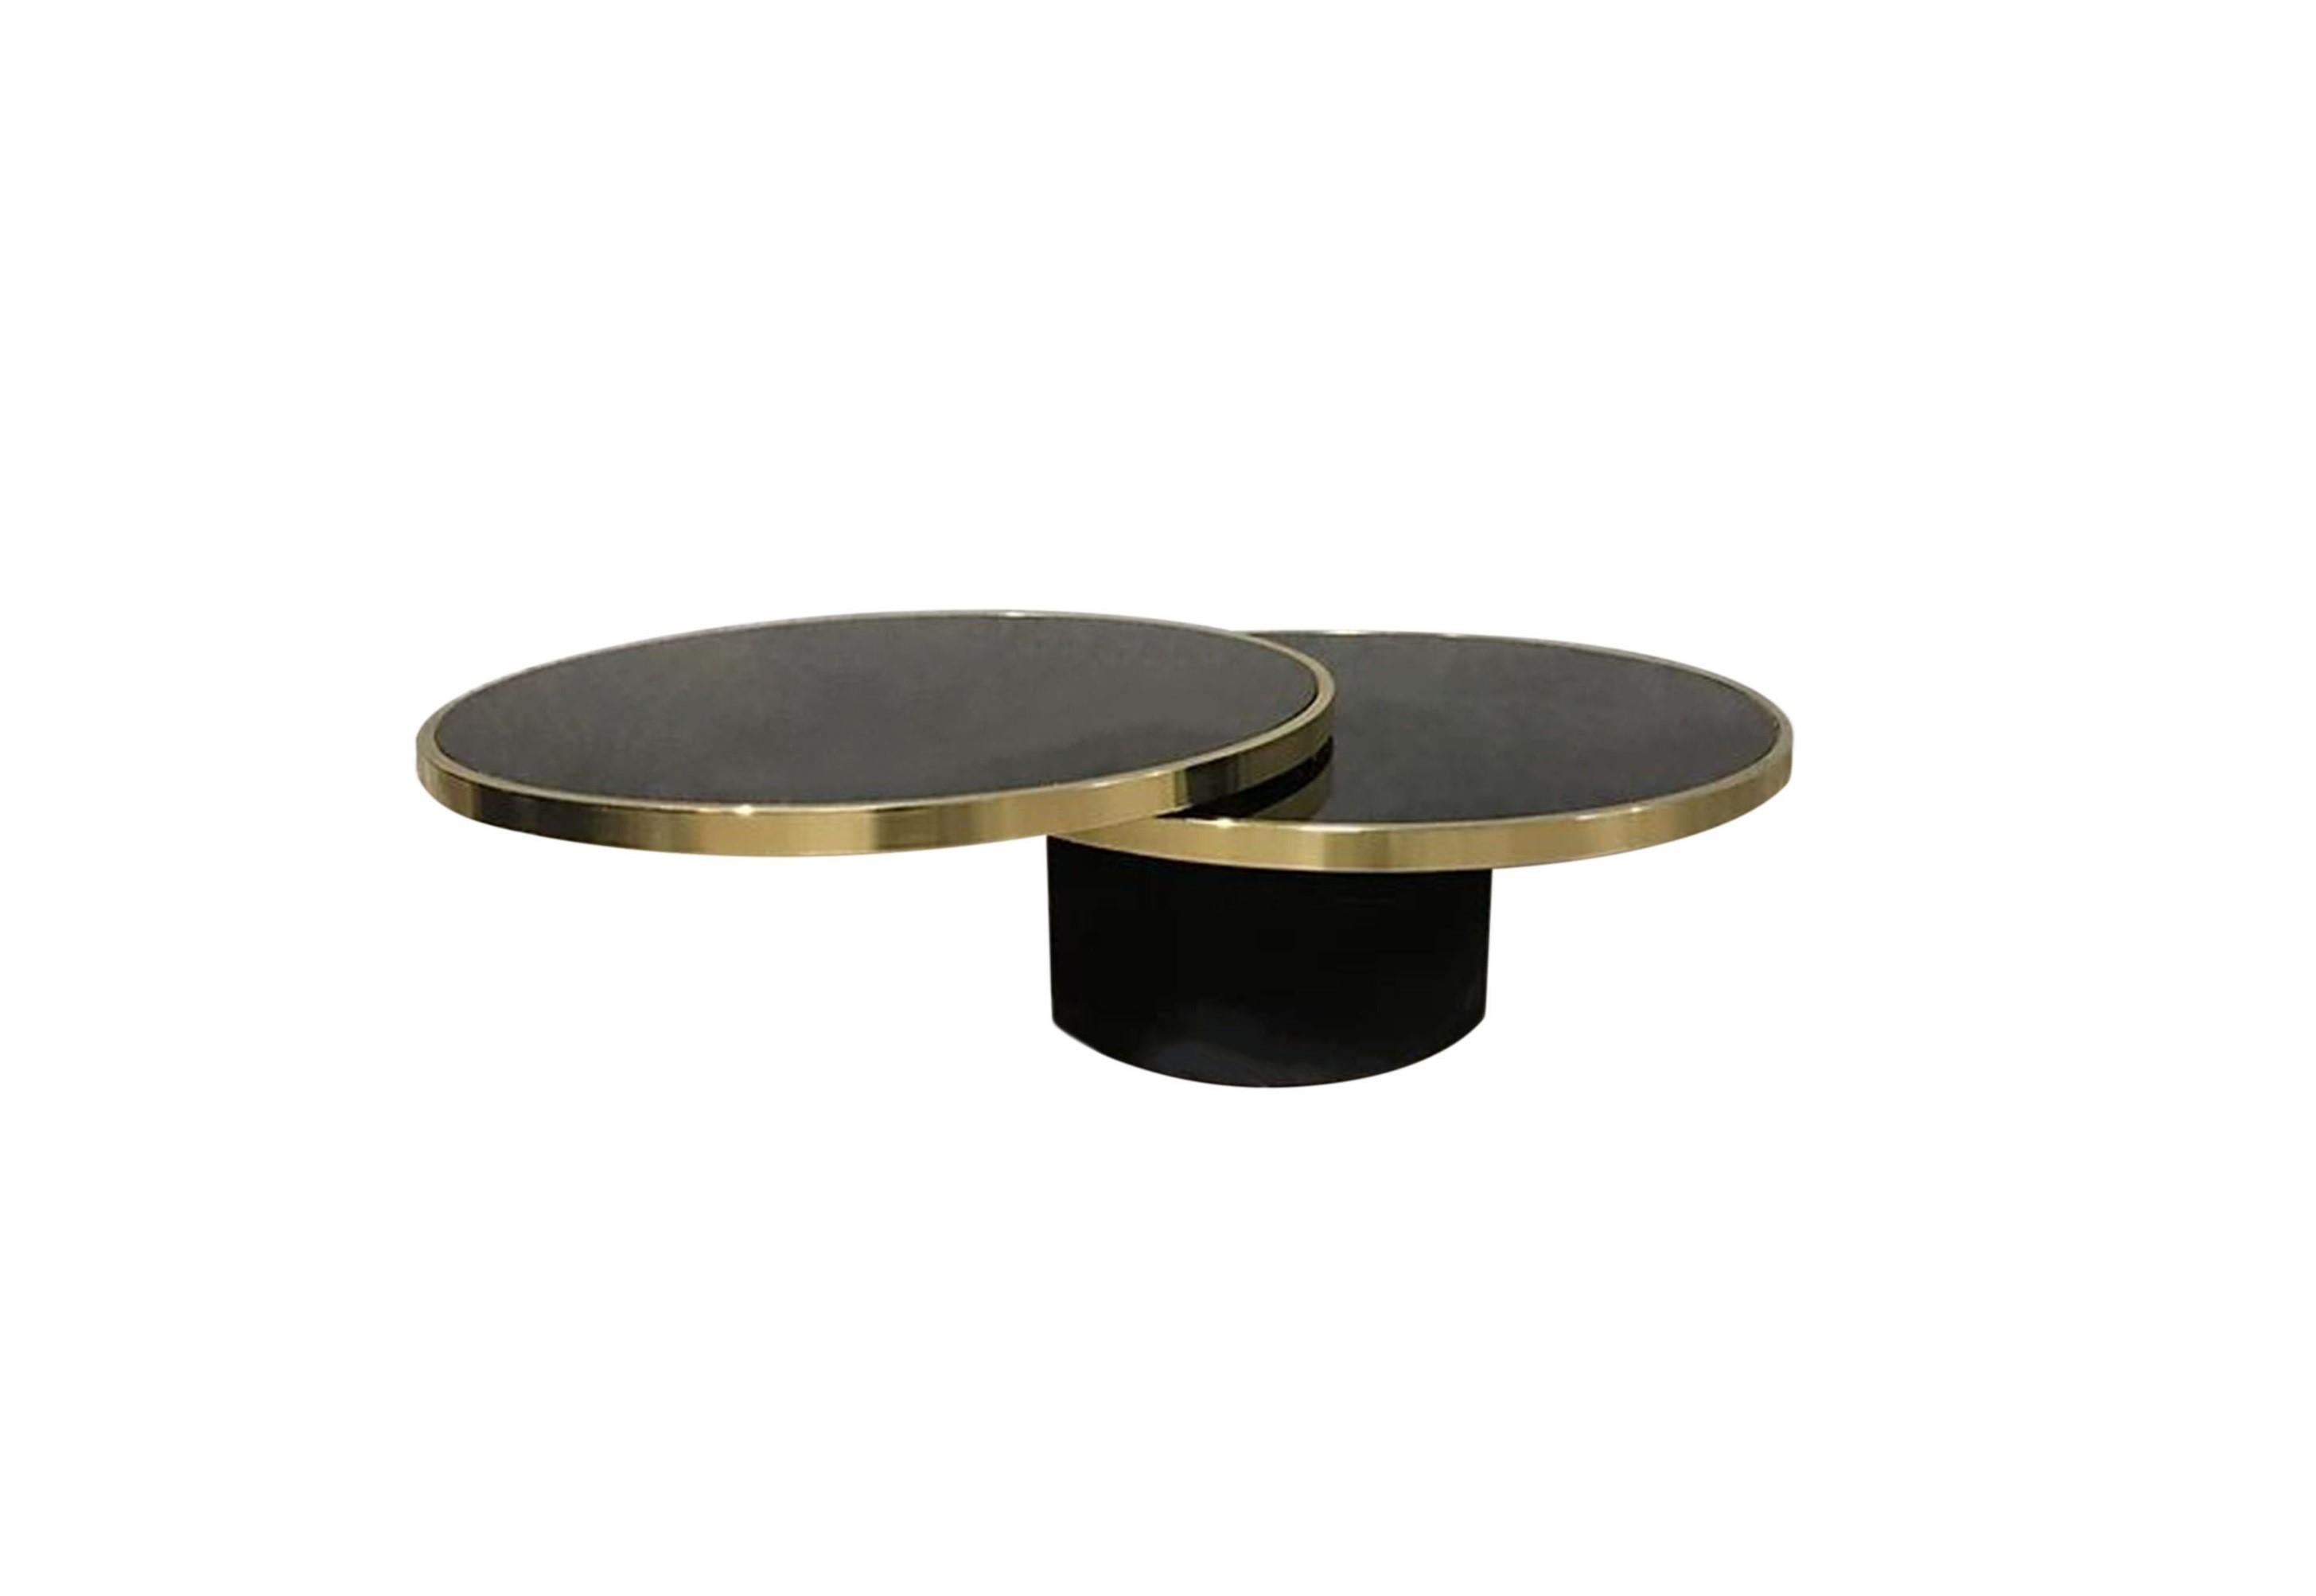 Stunning piece by Design Institute of America. Highly functional two tier coffee or cocktail table designed by Richary Berry in the 70's. Features newly re-plated brass double ring frames that hold round reverse black painted glass tops floating on